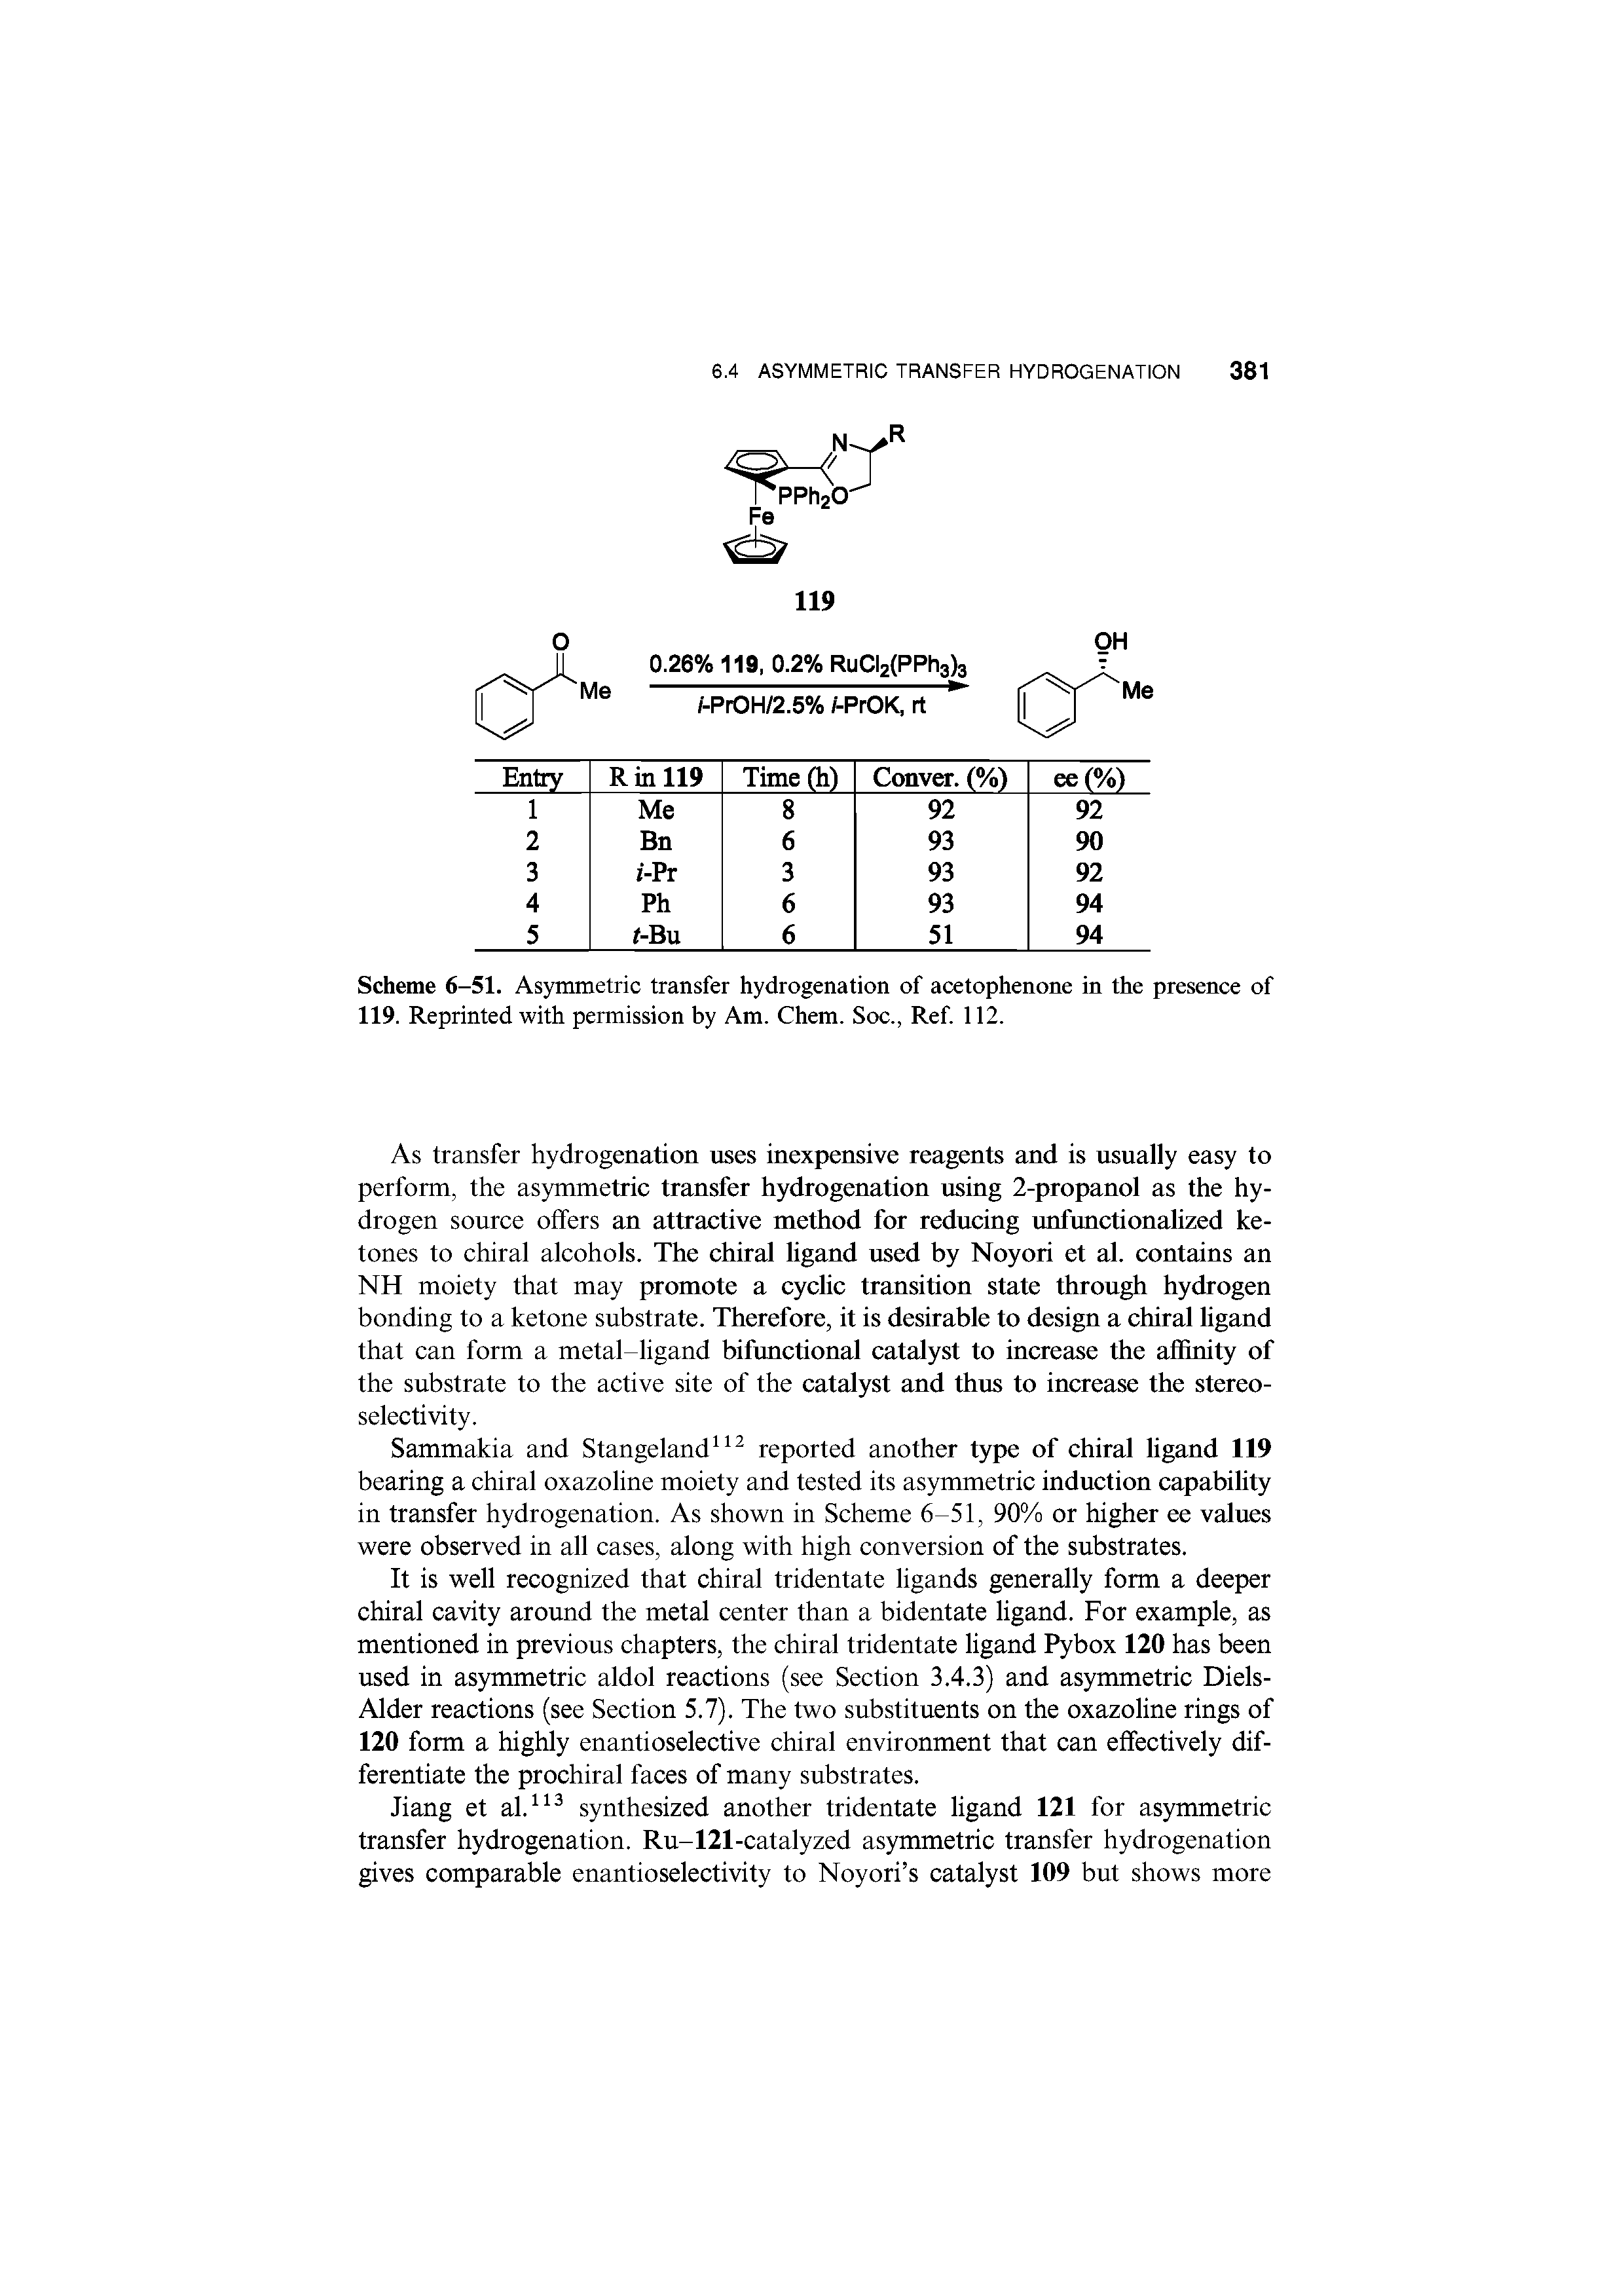 Scheme 6-51. Asymmetric transfer hydrogenation of acetophenone in the presence of 119. Reprinted with permission by Am. Chem. Soc., Ref. 112.